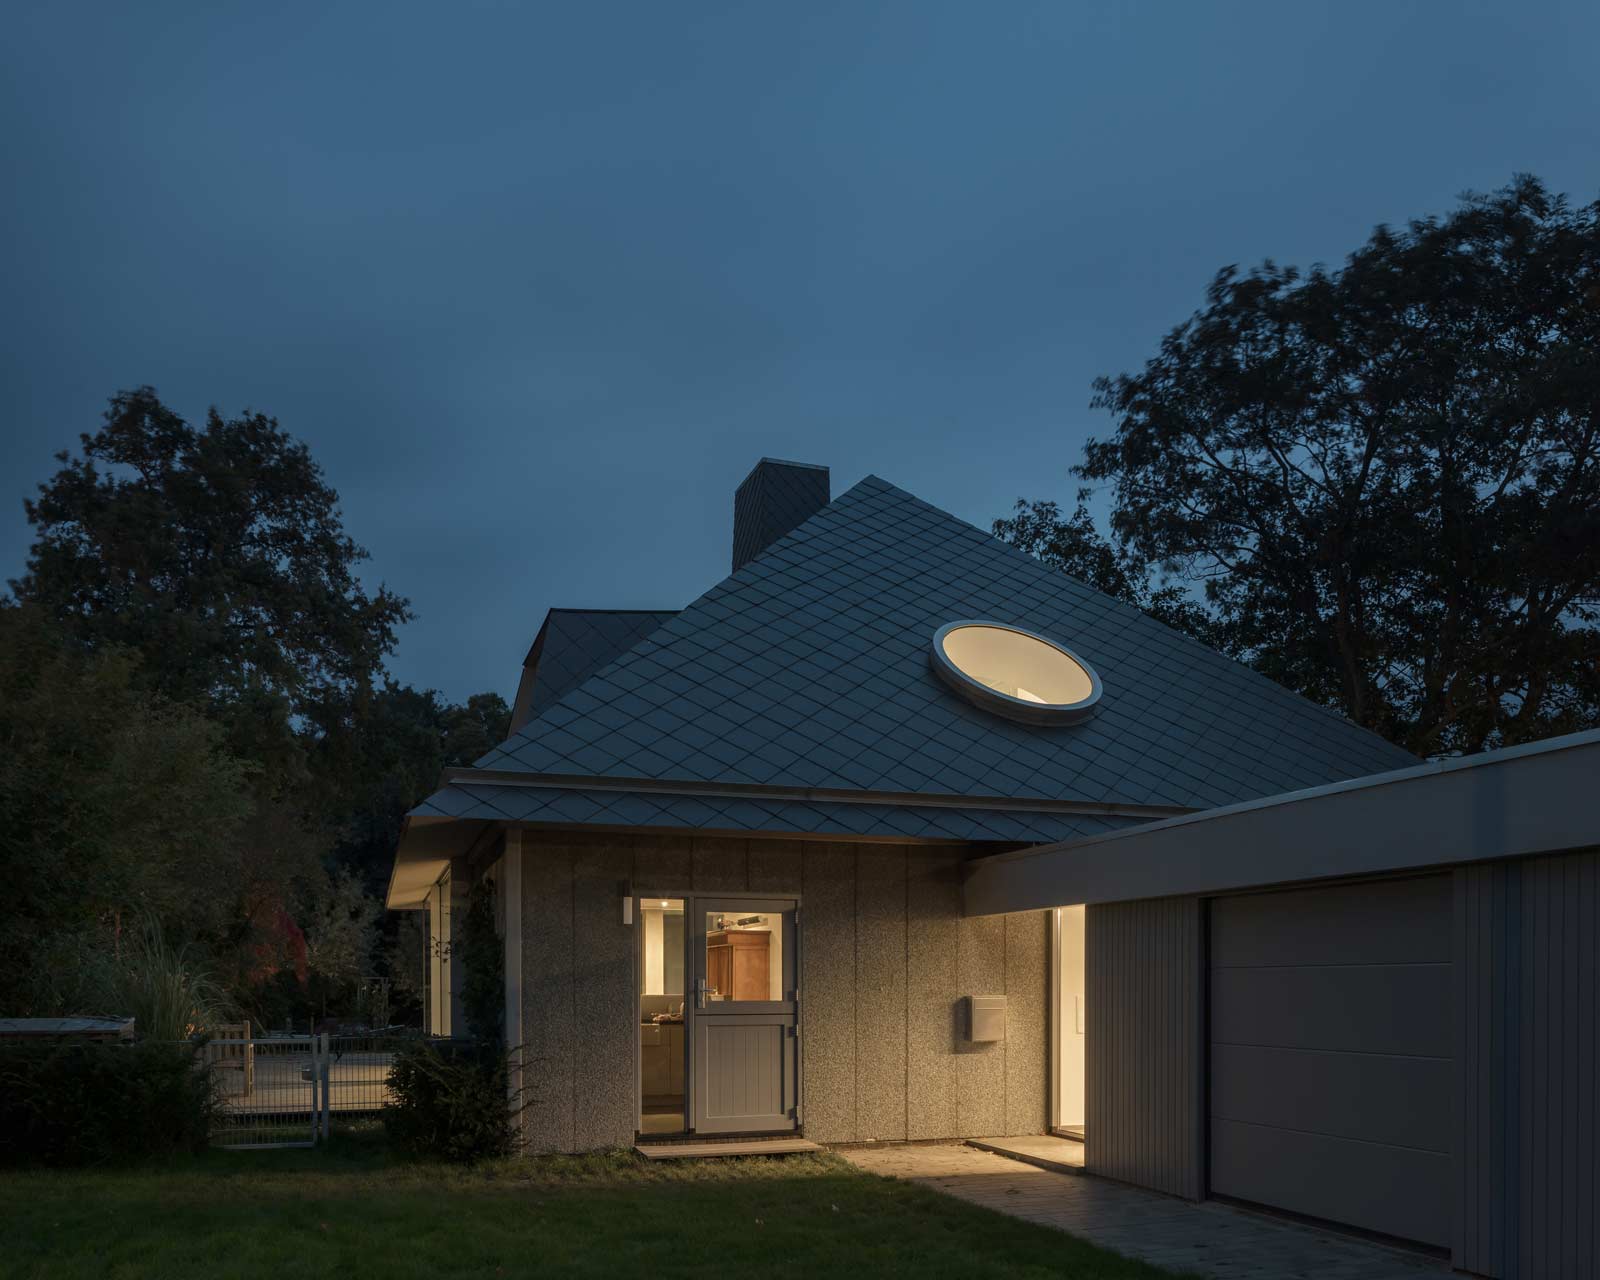 exterior night photo of house tc with circular roof light by beta architect amsterdam evert klinkenberg gus auguste van oppen image by Stijn Bollaert